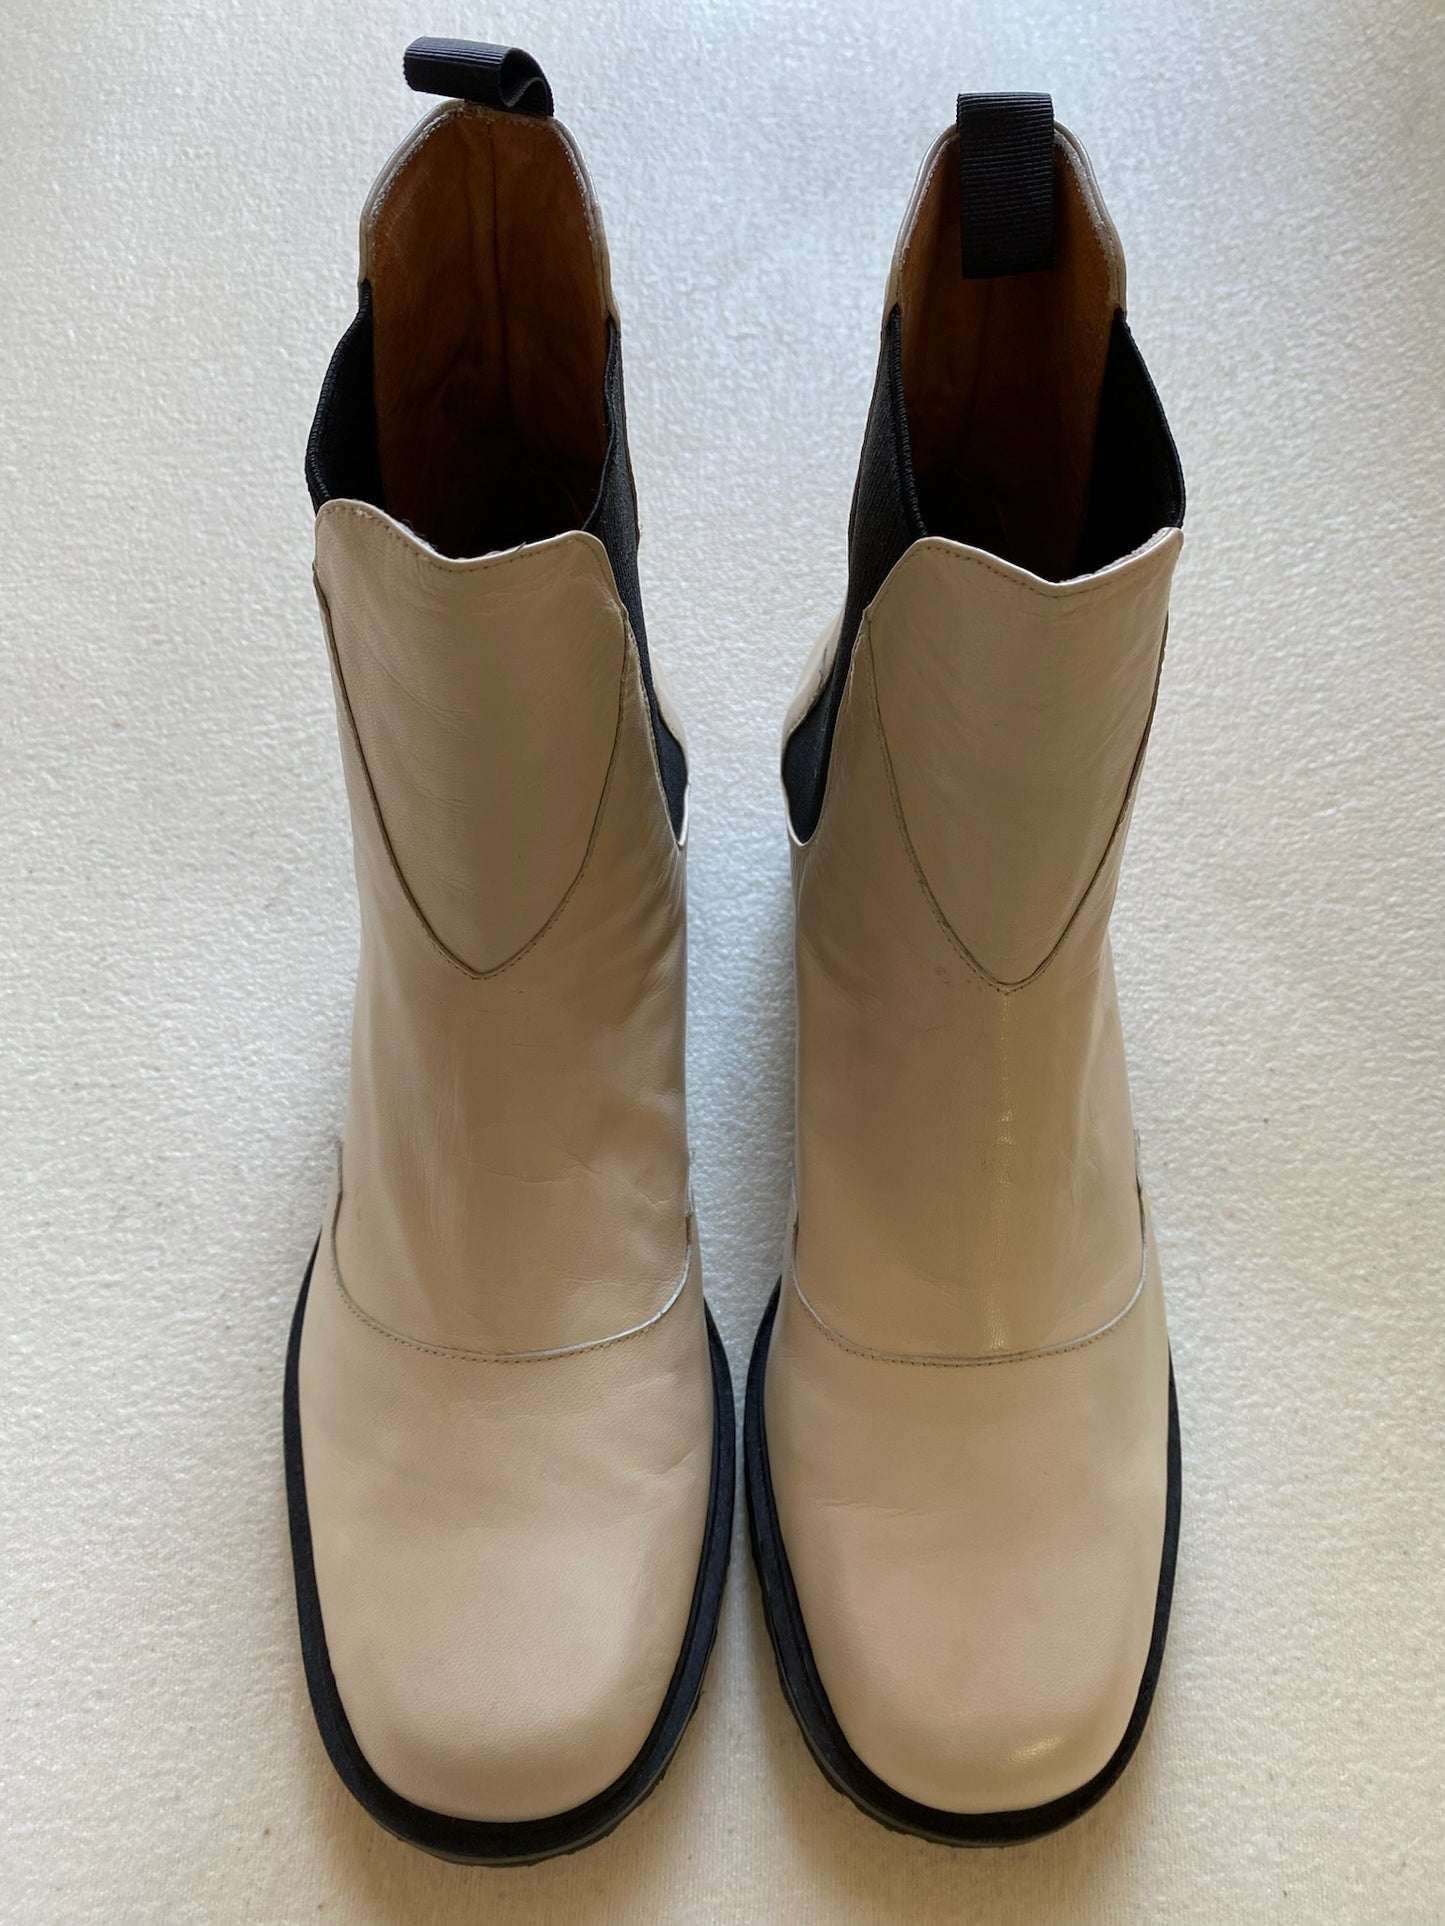 High Nerea Boot in Marfil Size 40